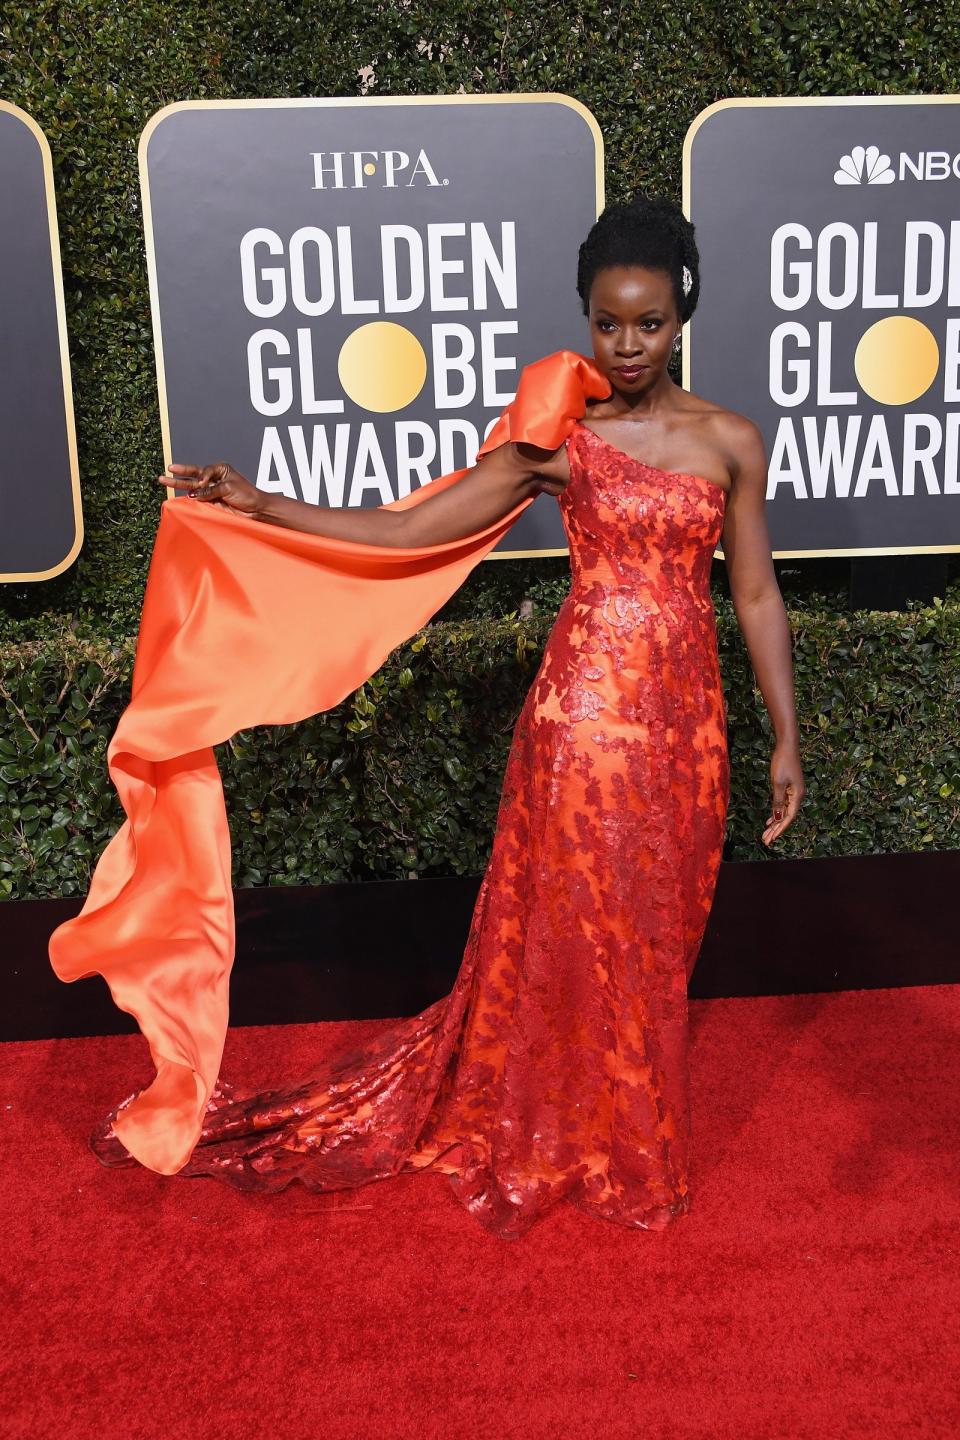 The Best Golden Globes Dresses of All Time